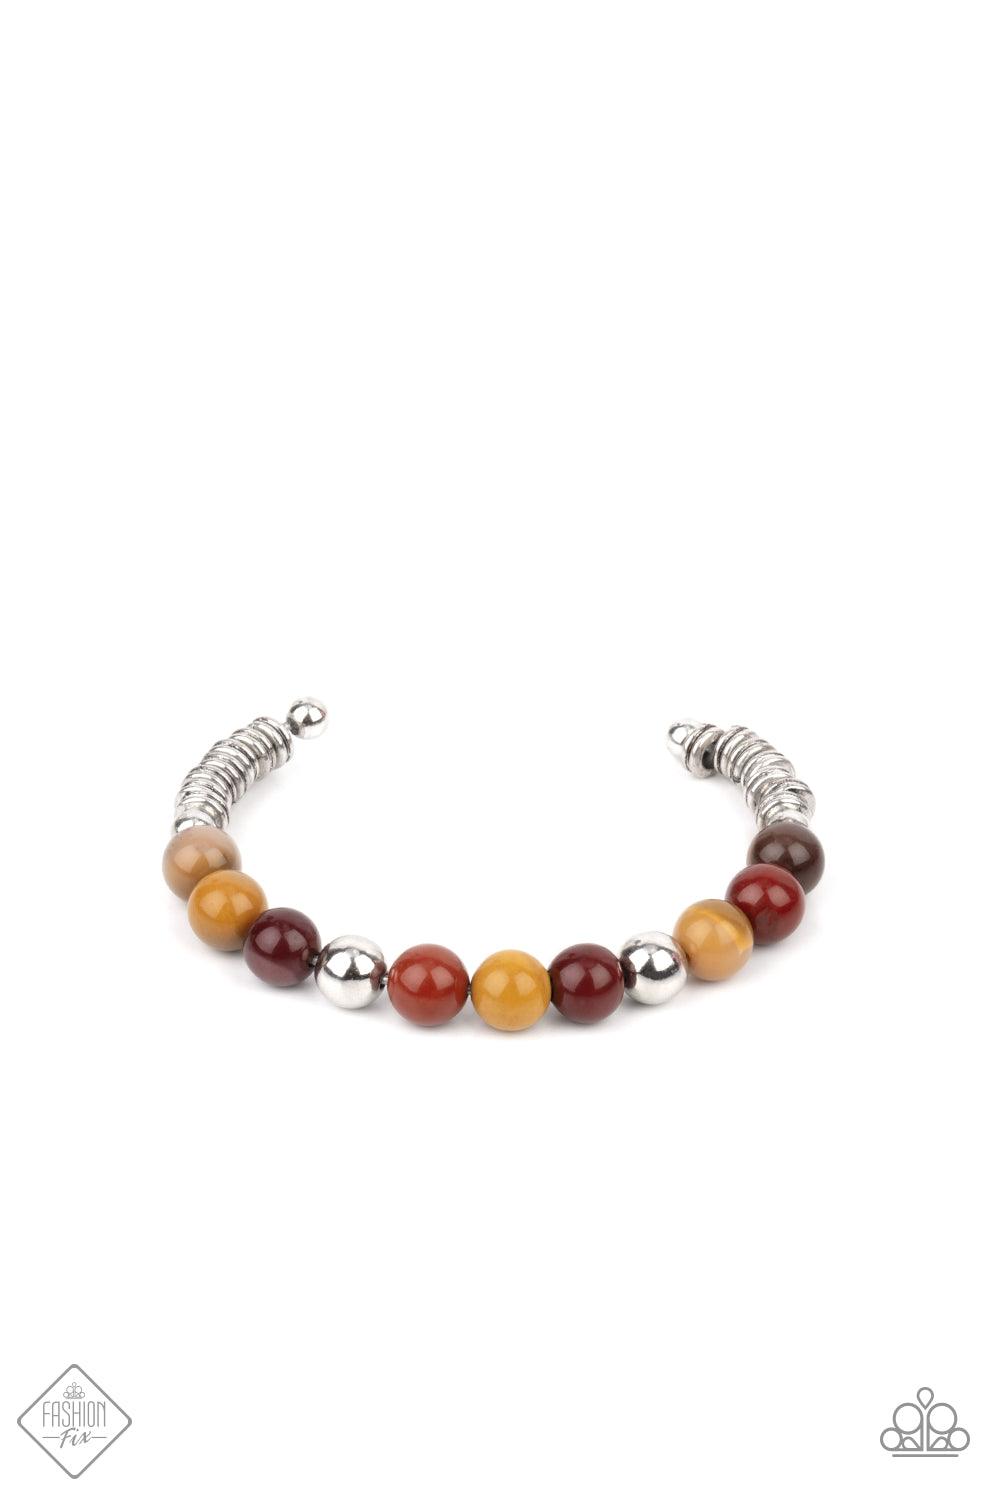 Paparazzi Accessories Pure Prana - Multi Accented with shiny silver beads, a collection of polished multicolored stone beads are fashioned into a wire cuff bracelet. The earthy stones give way on each end to a number of silver rings enclosed by small silv